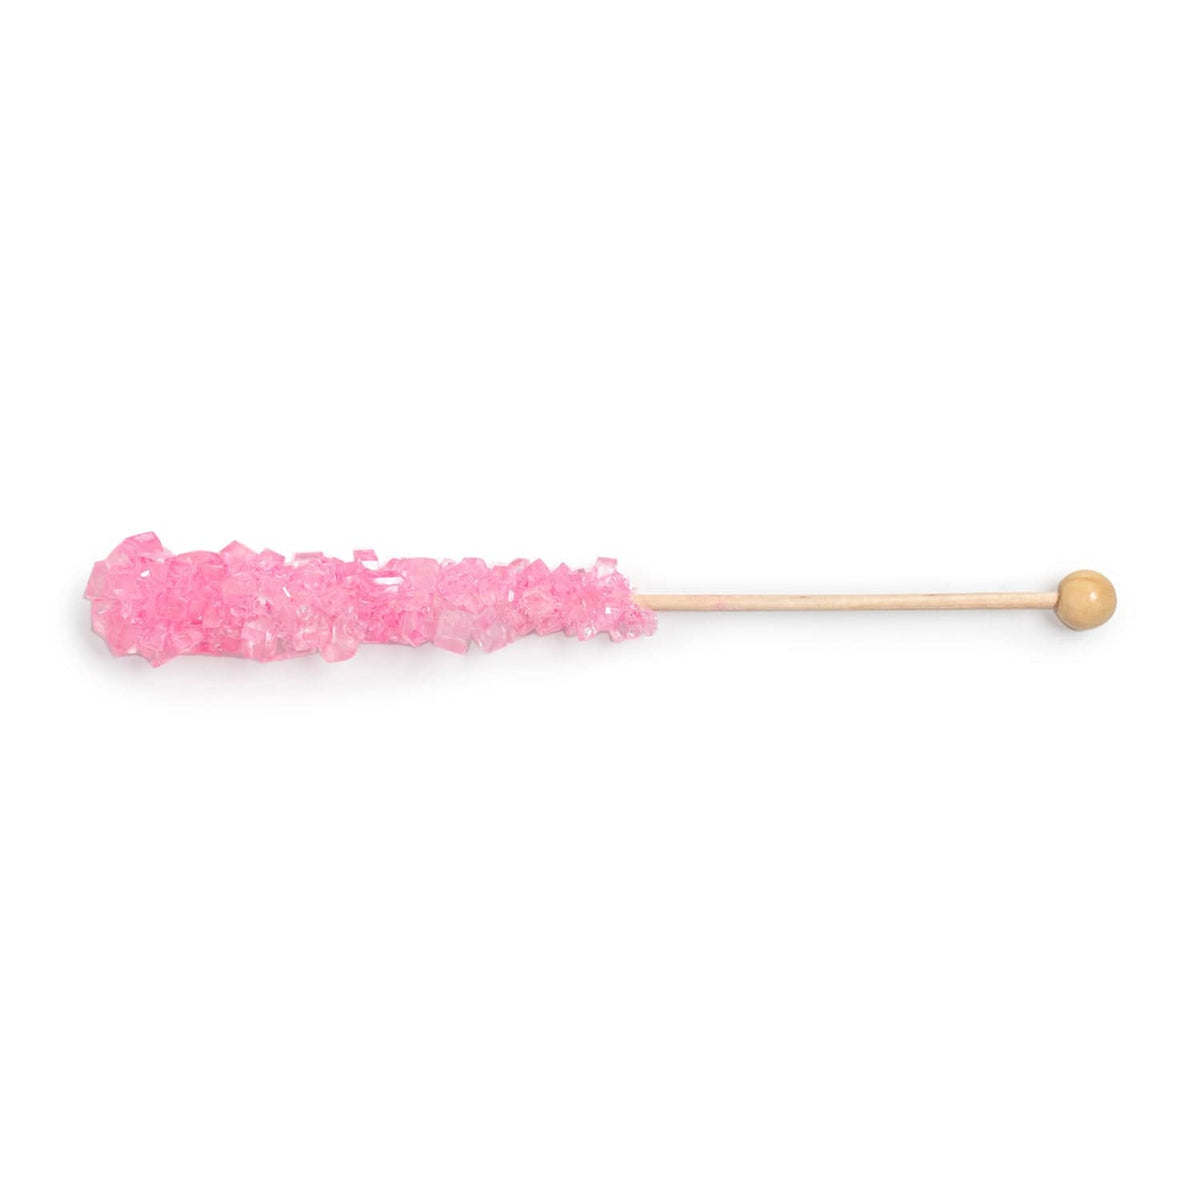 Lolli and Pops L&amp;P Collection Strawberry Rock Candy